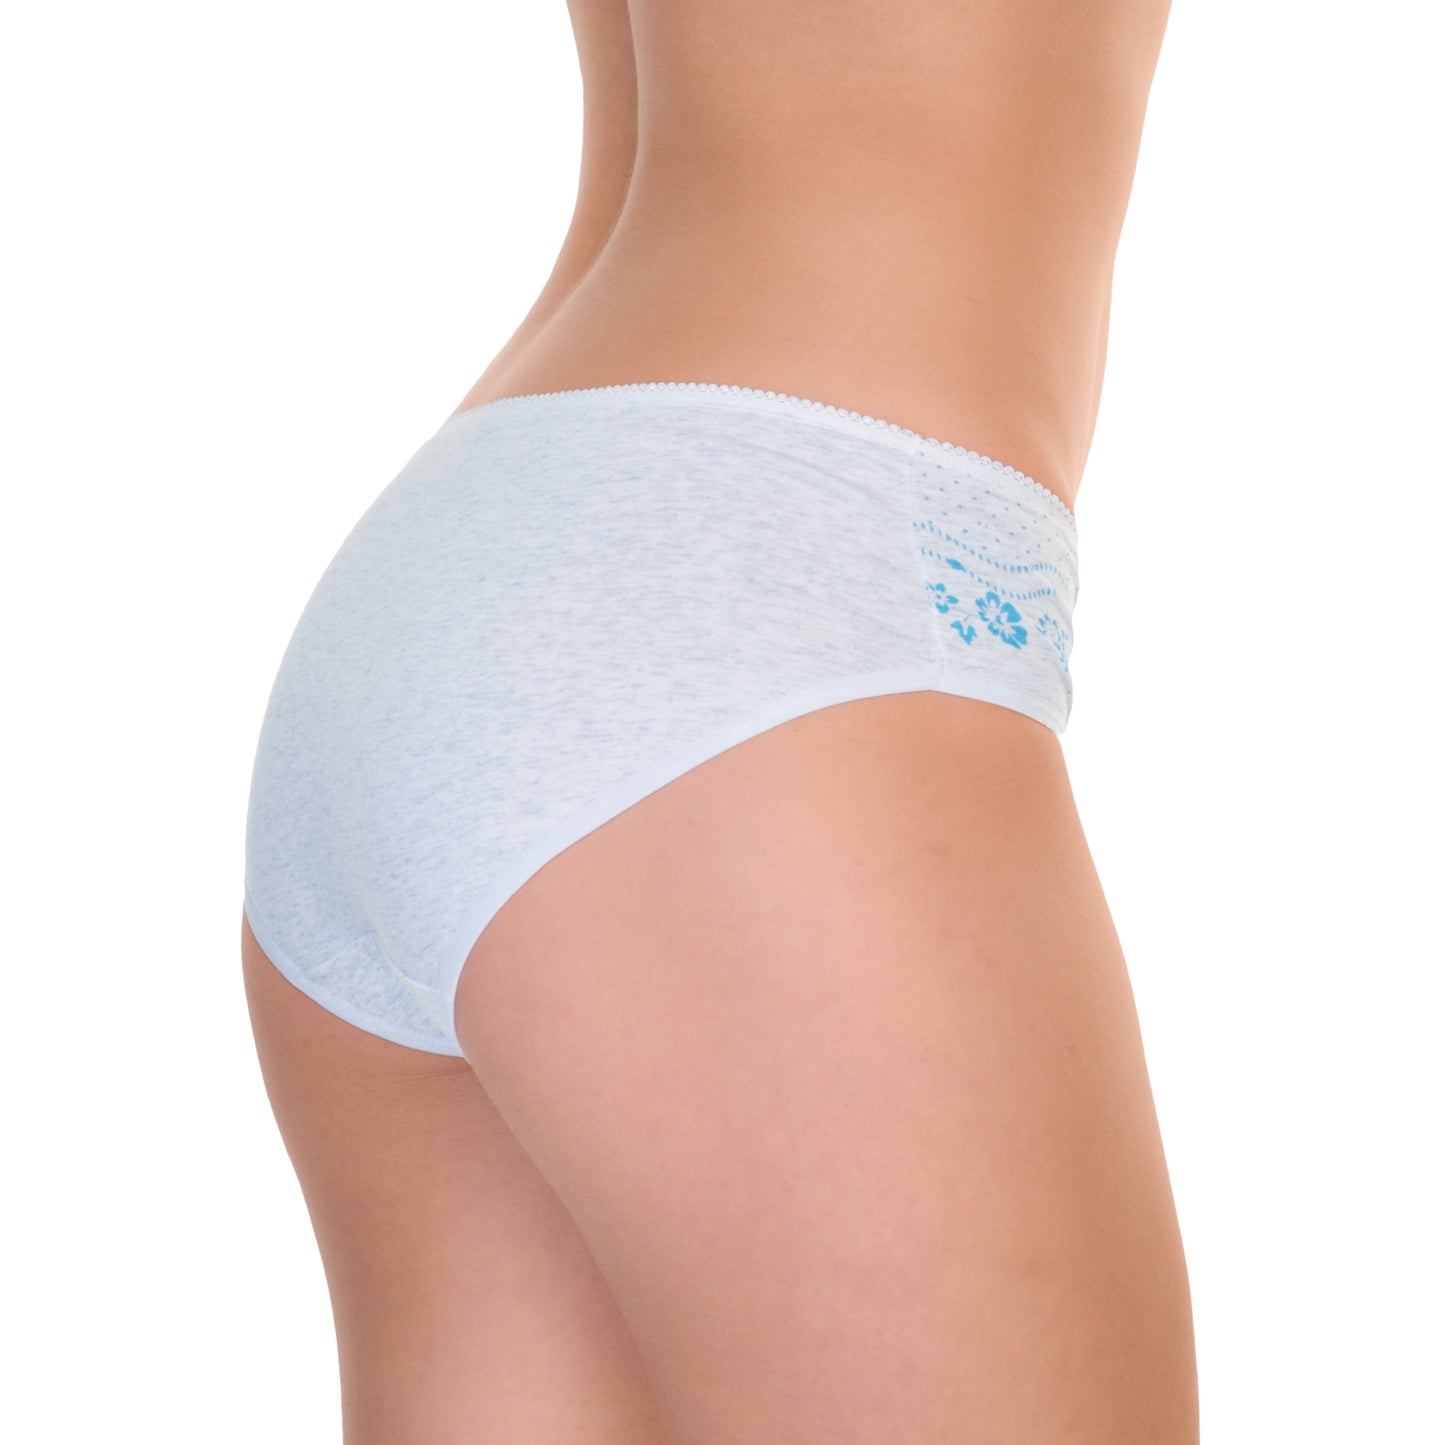 Cotton Hiphugger Panties with Flower Print Detail (12-Pack)